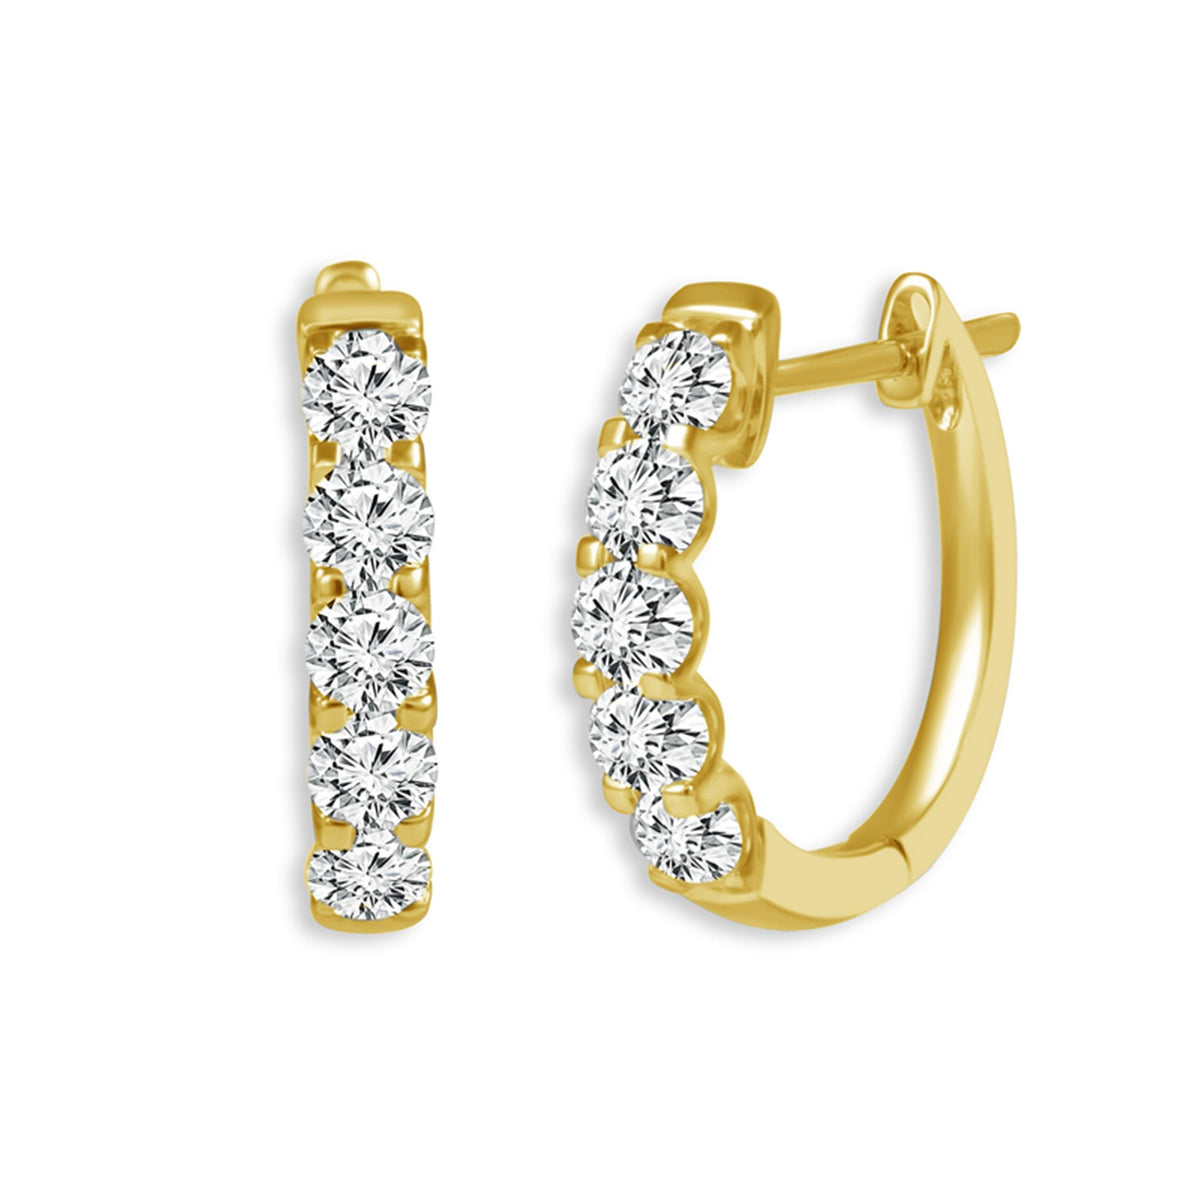 14Kt Yellow Gold Round Hoop Earrings With 1.93cttw Natural Diamonds